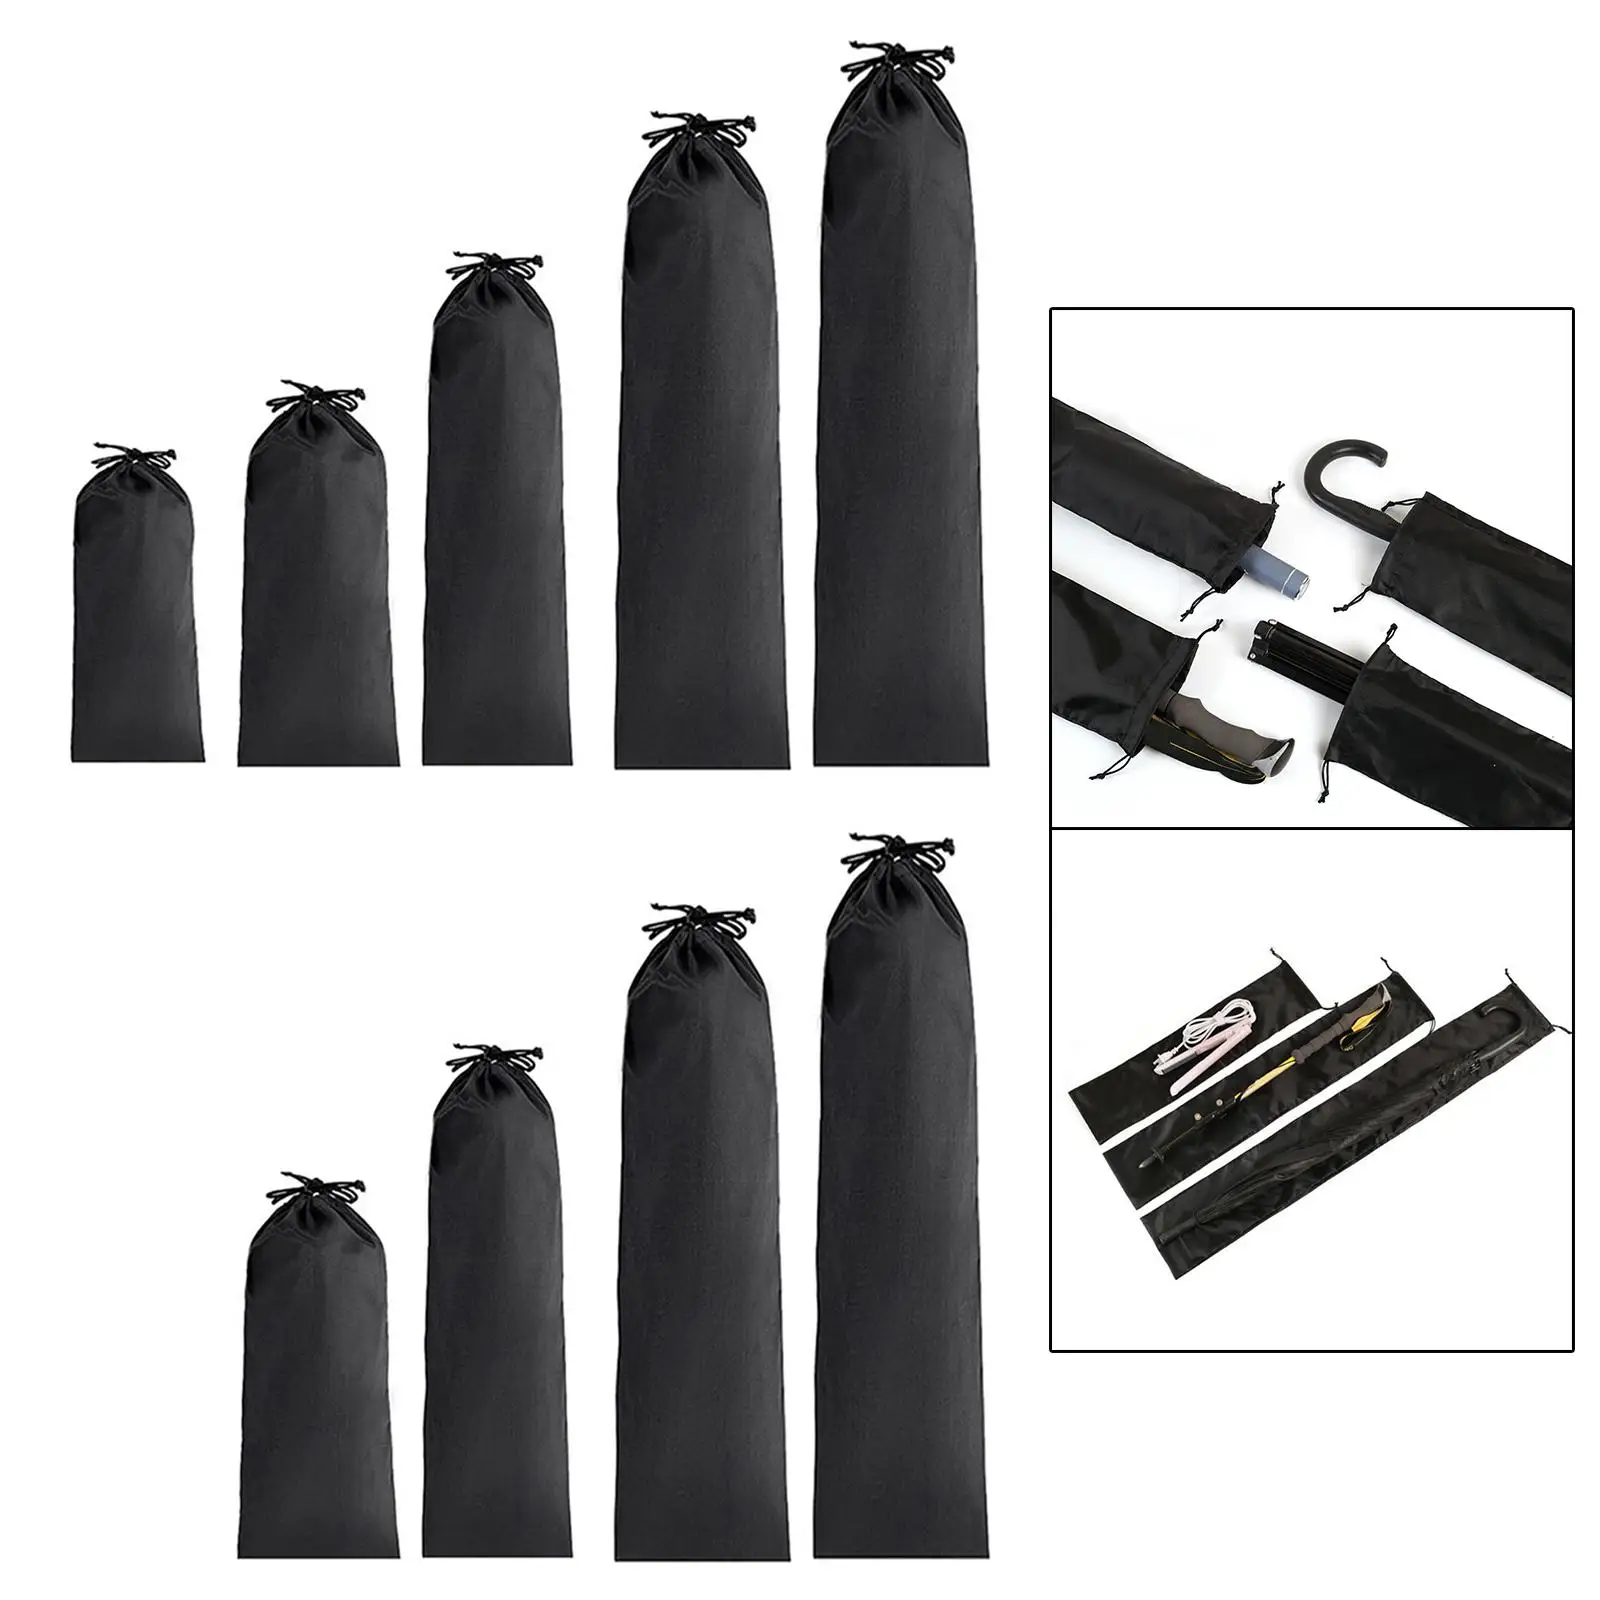 Storage Bag Nylon Drawstring Bags Replacement Bag Lightweight Tote Bag Organizer for Other Equipment Tripods Trekking Poles  